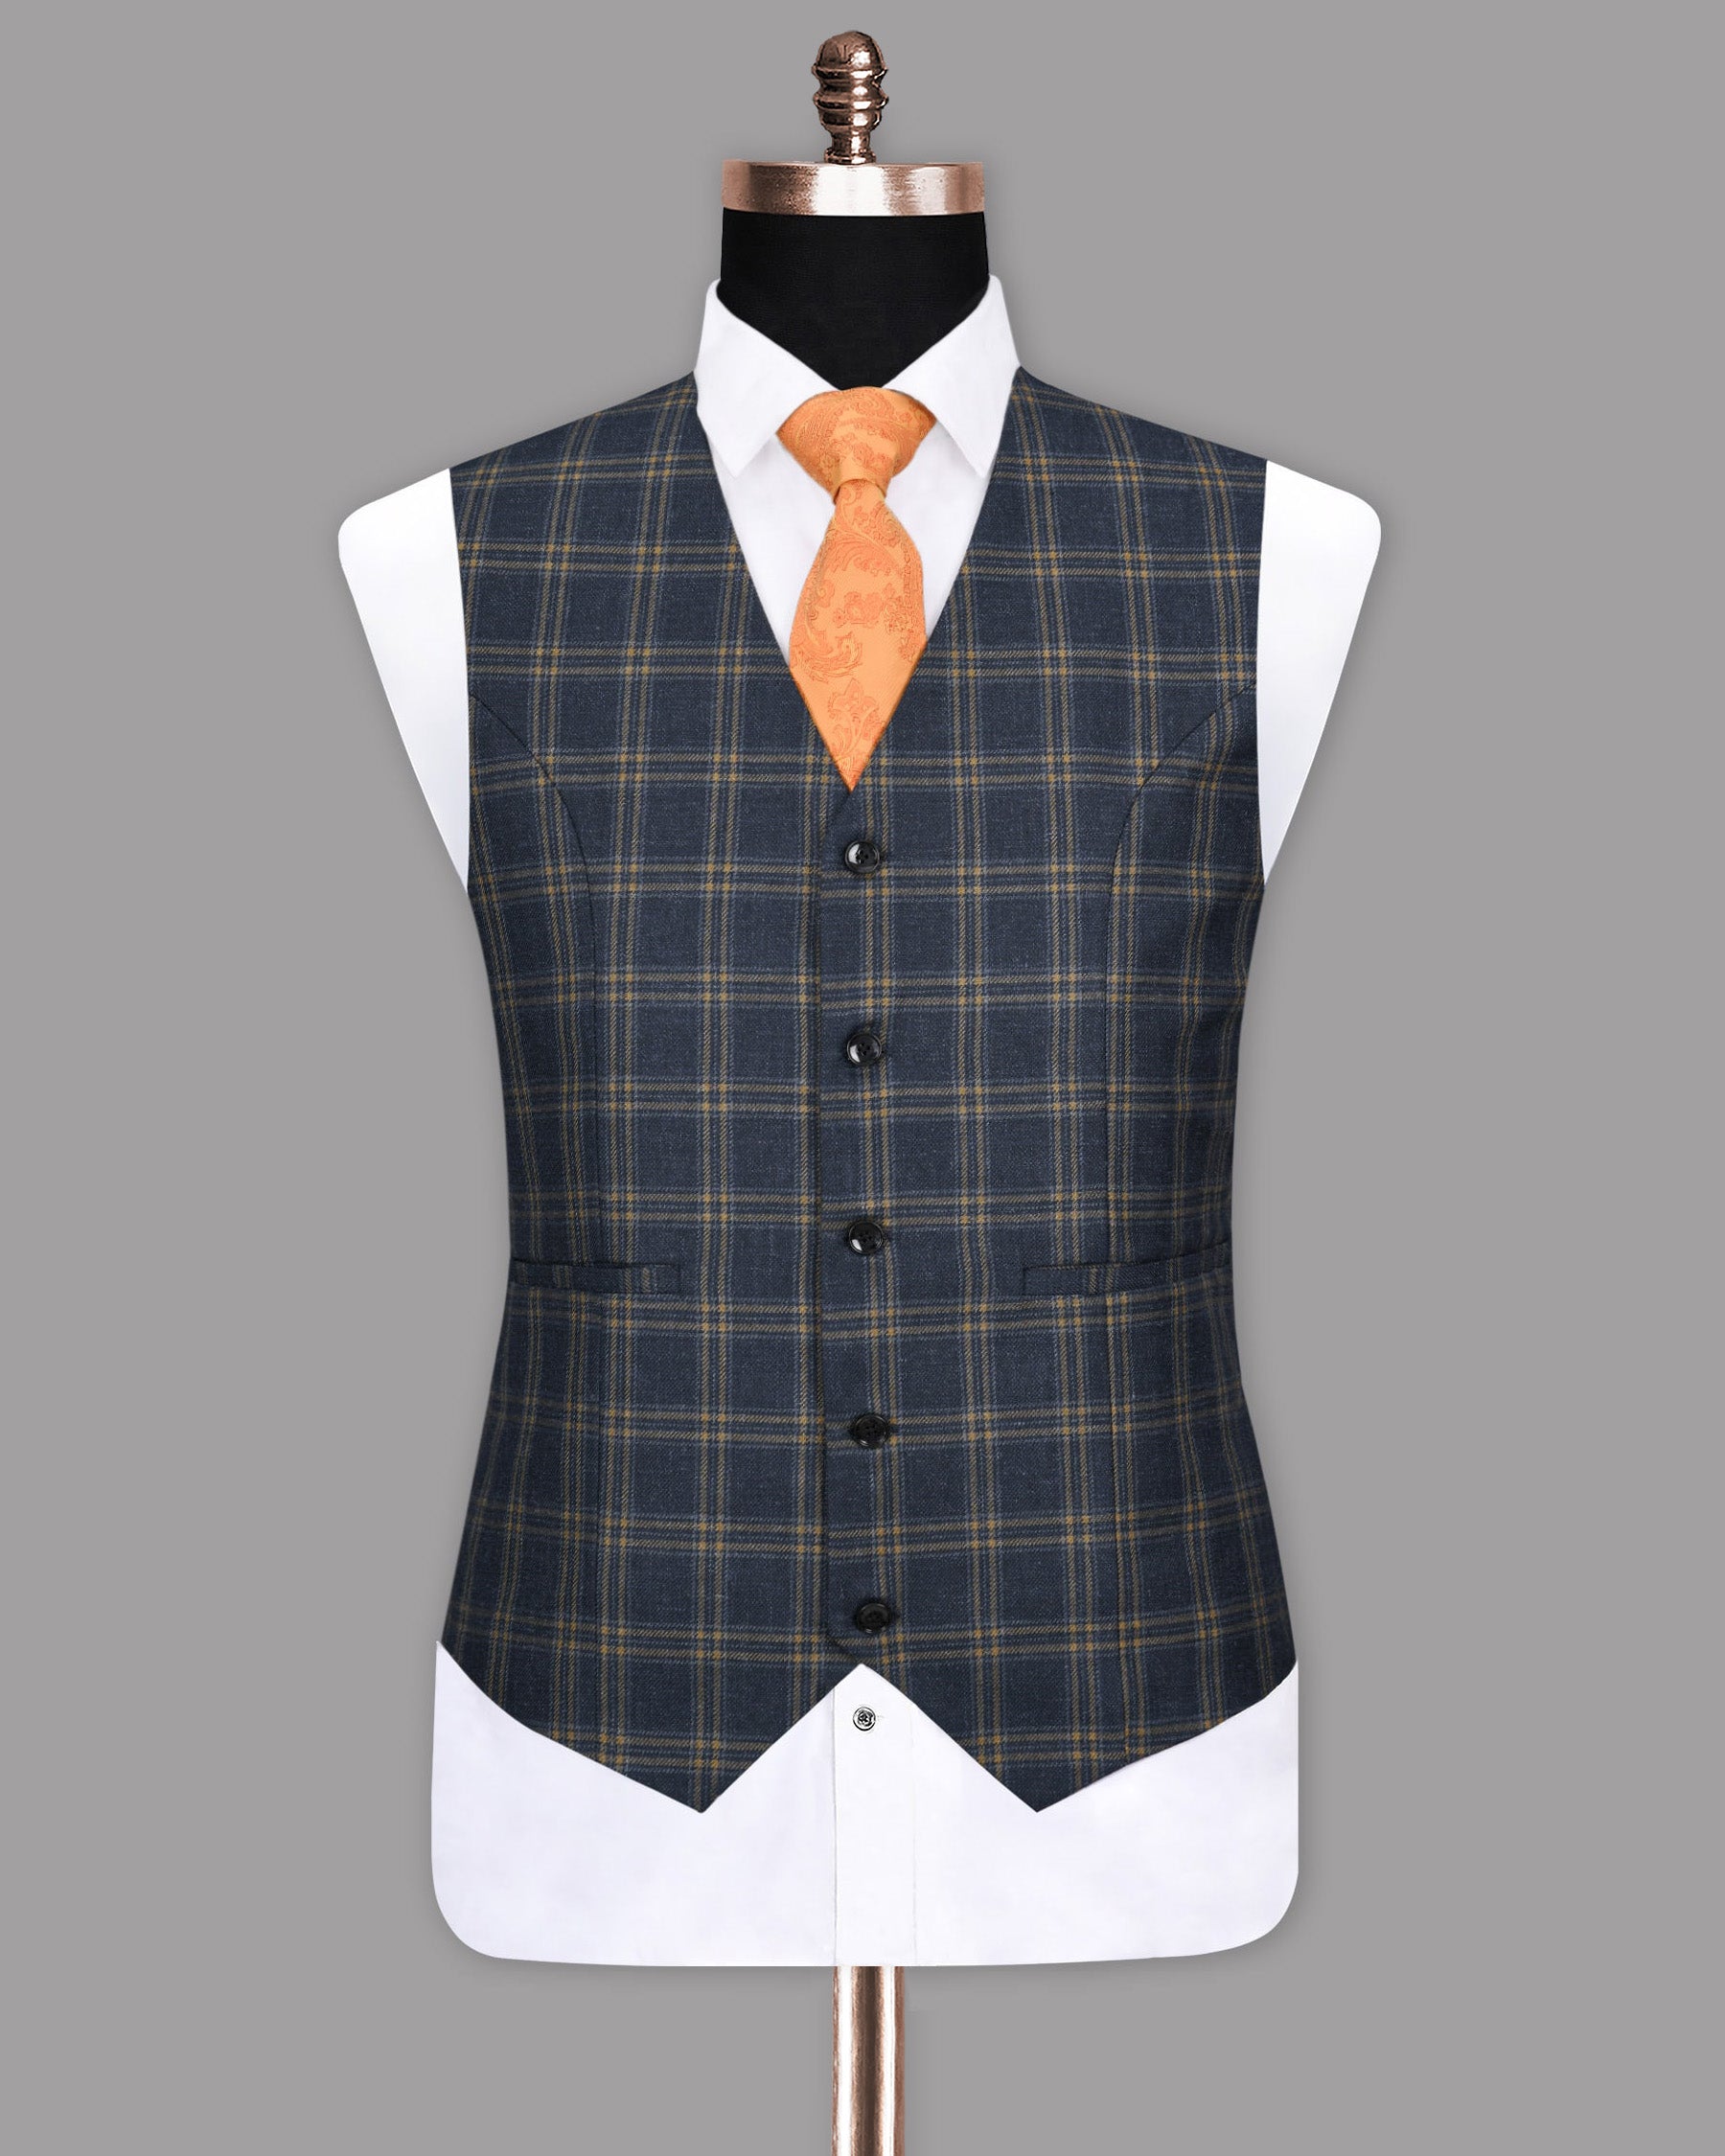 Martinique Blue with Driftwood Brown Windowpane Waistcoat V1136-36, V1136-52, V1136-56, V1136-58, V1136-38, V1136-44, V1136-40, V1136-48, V1136-50, V1136-54, V1136-60, V1136-42, V1136-46